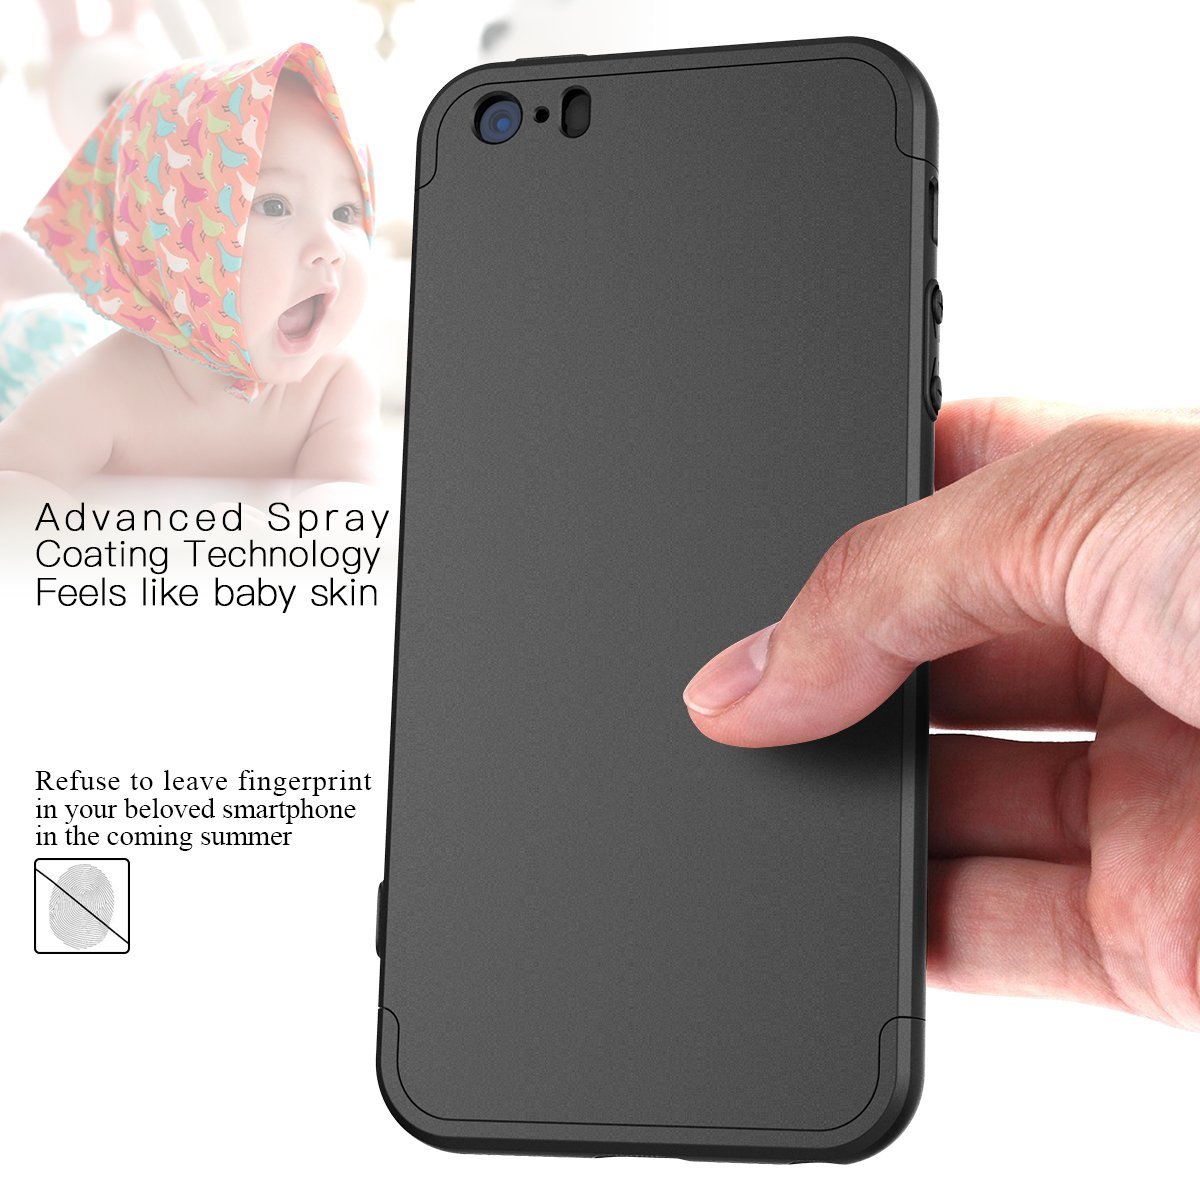 Bakeeytrade-3-in-1-Double-Dip-360deg-Full-Protection-Hard-PC-Protective-Case-for-iPhone-5-5S-SE-1176504